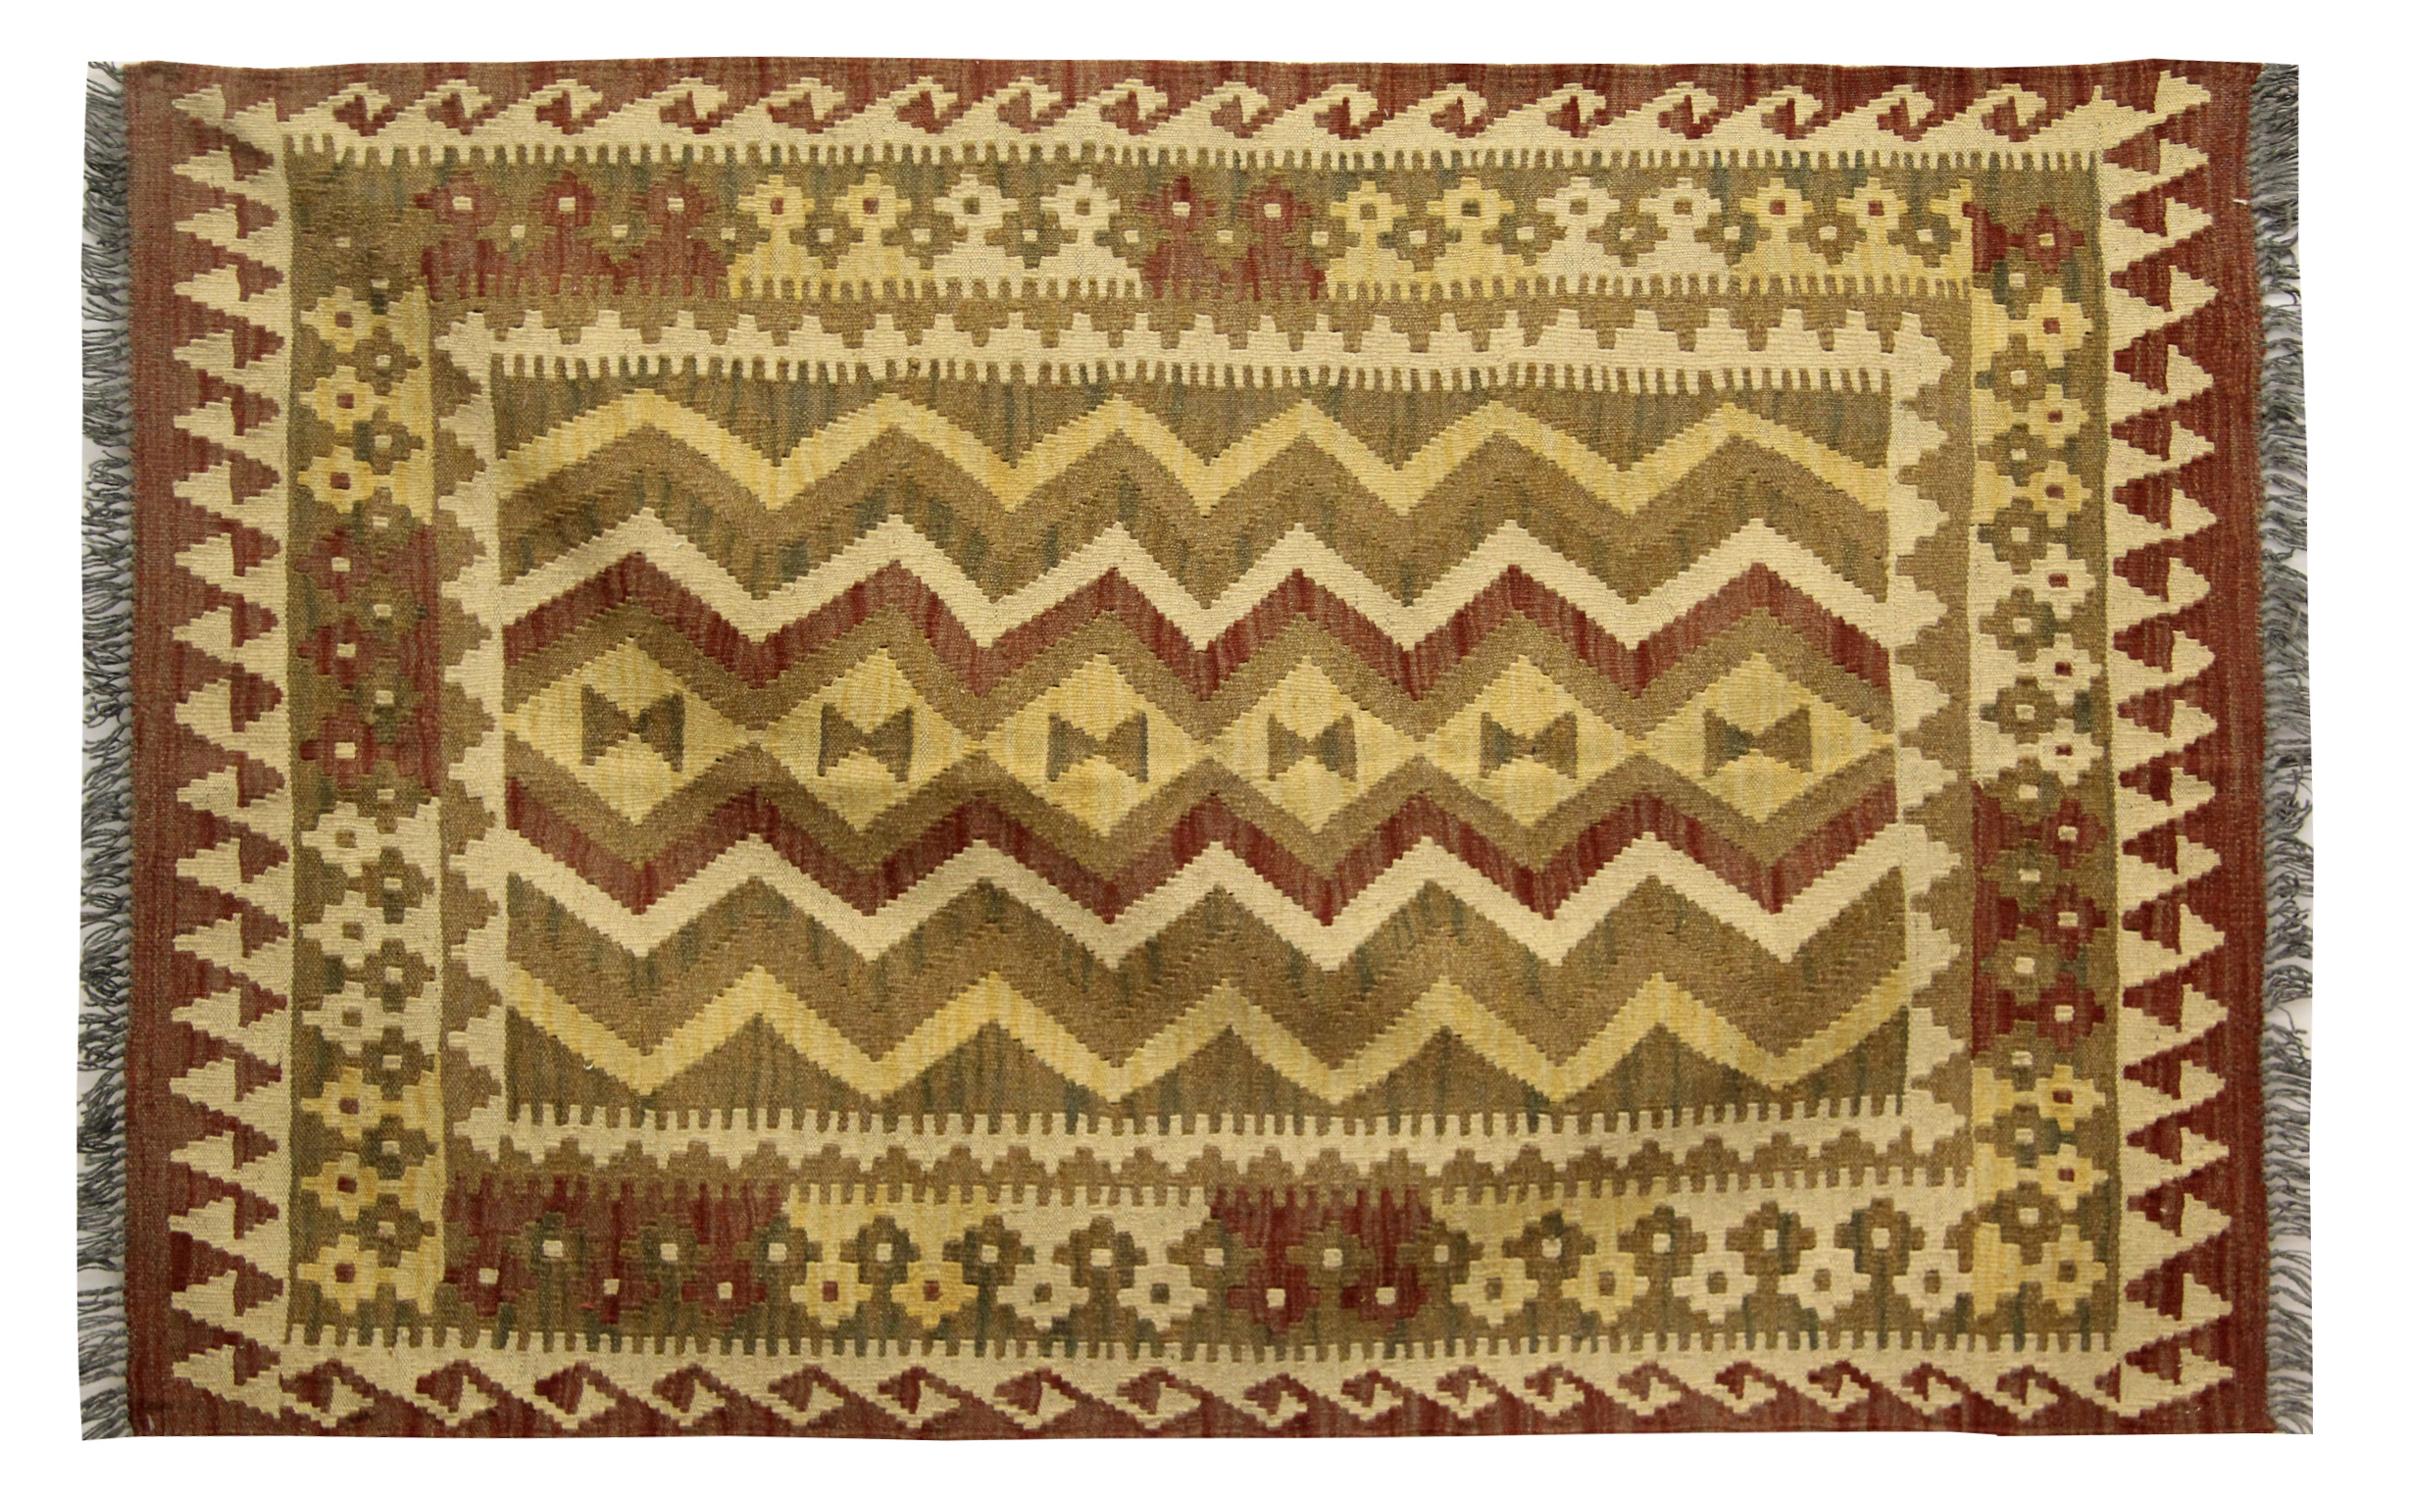 This tribal pattern rug is beautifully designed and delicately woven with the finest hand-spun wool. Featuring asymmetrical tribal pattern handwoven with a rich rustic colour palette of beige, cream and brown. With a simple repeat hook design